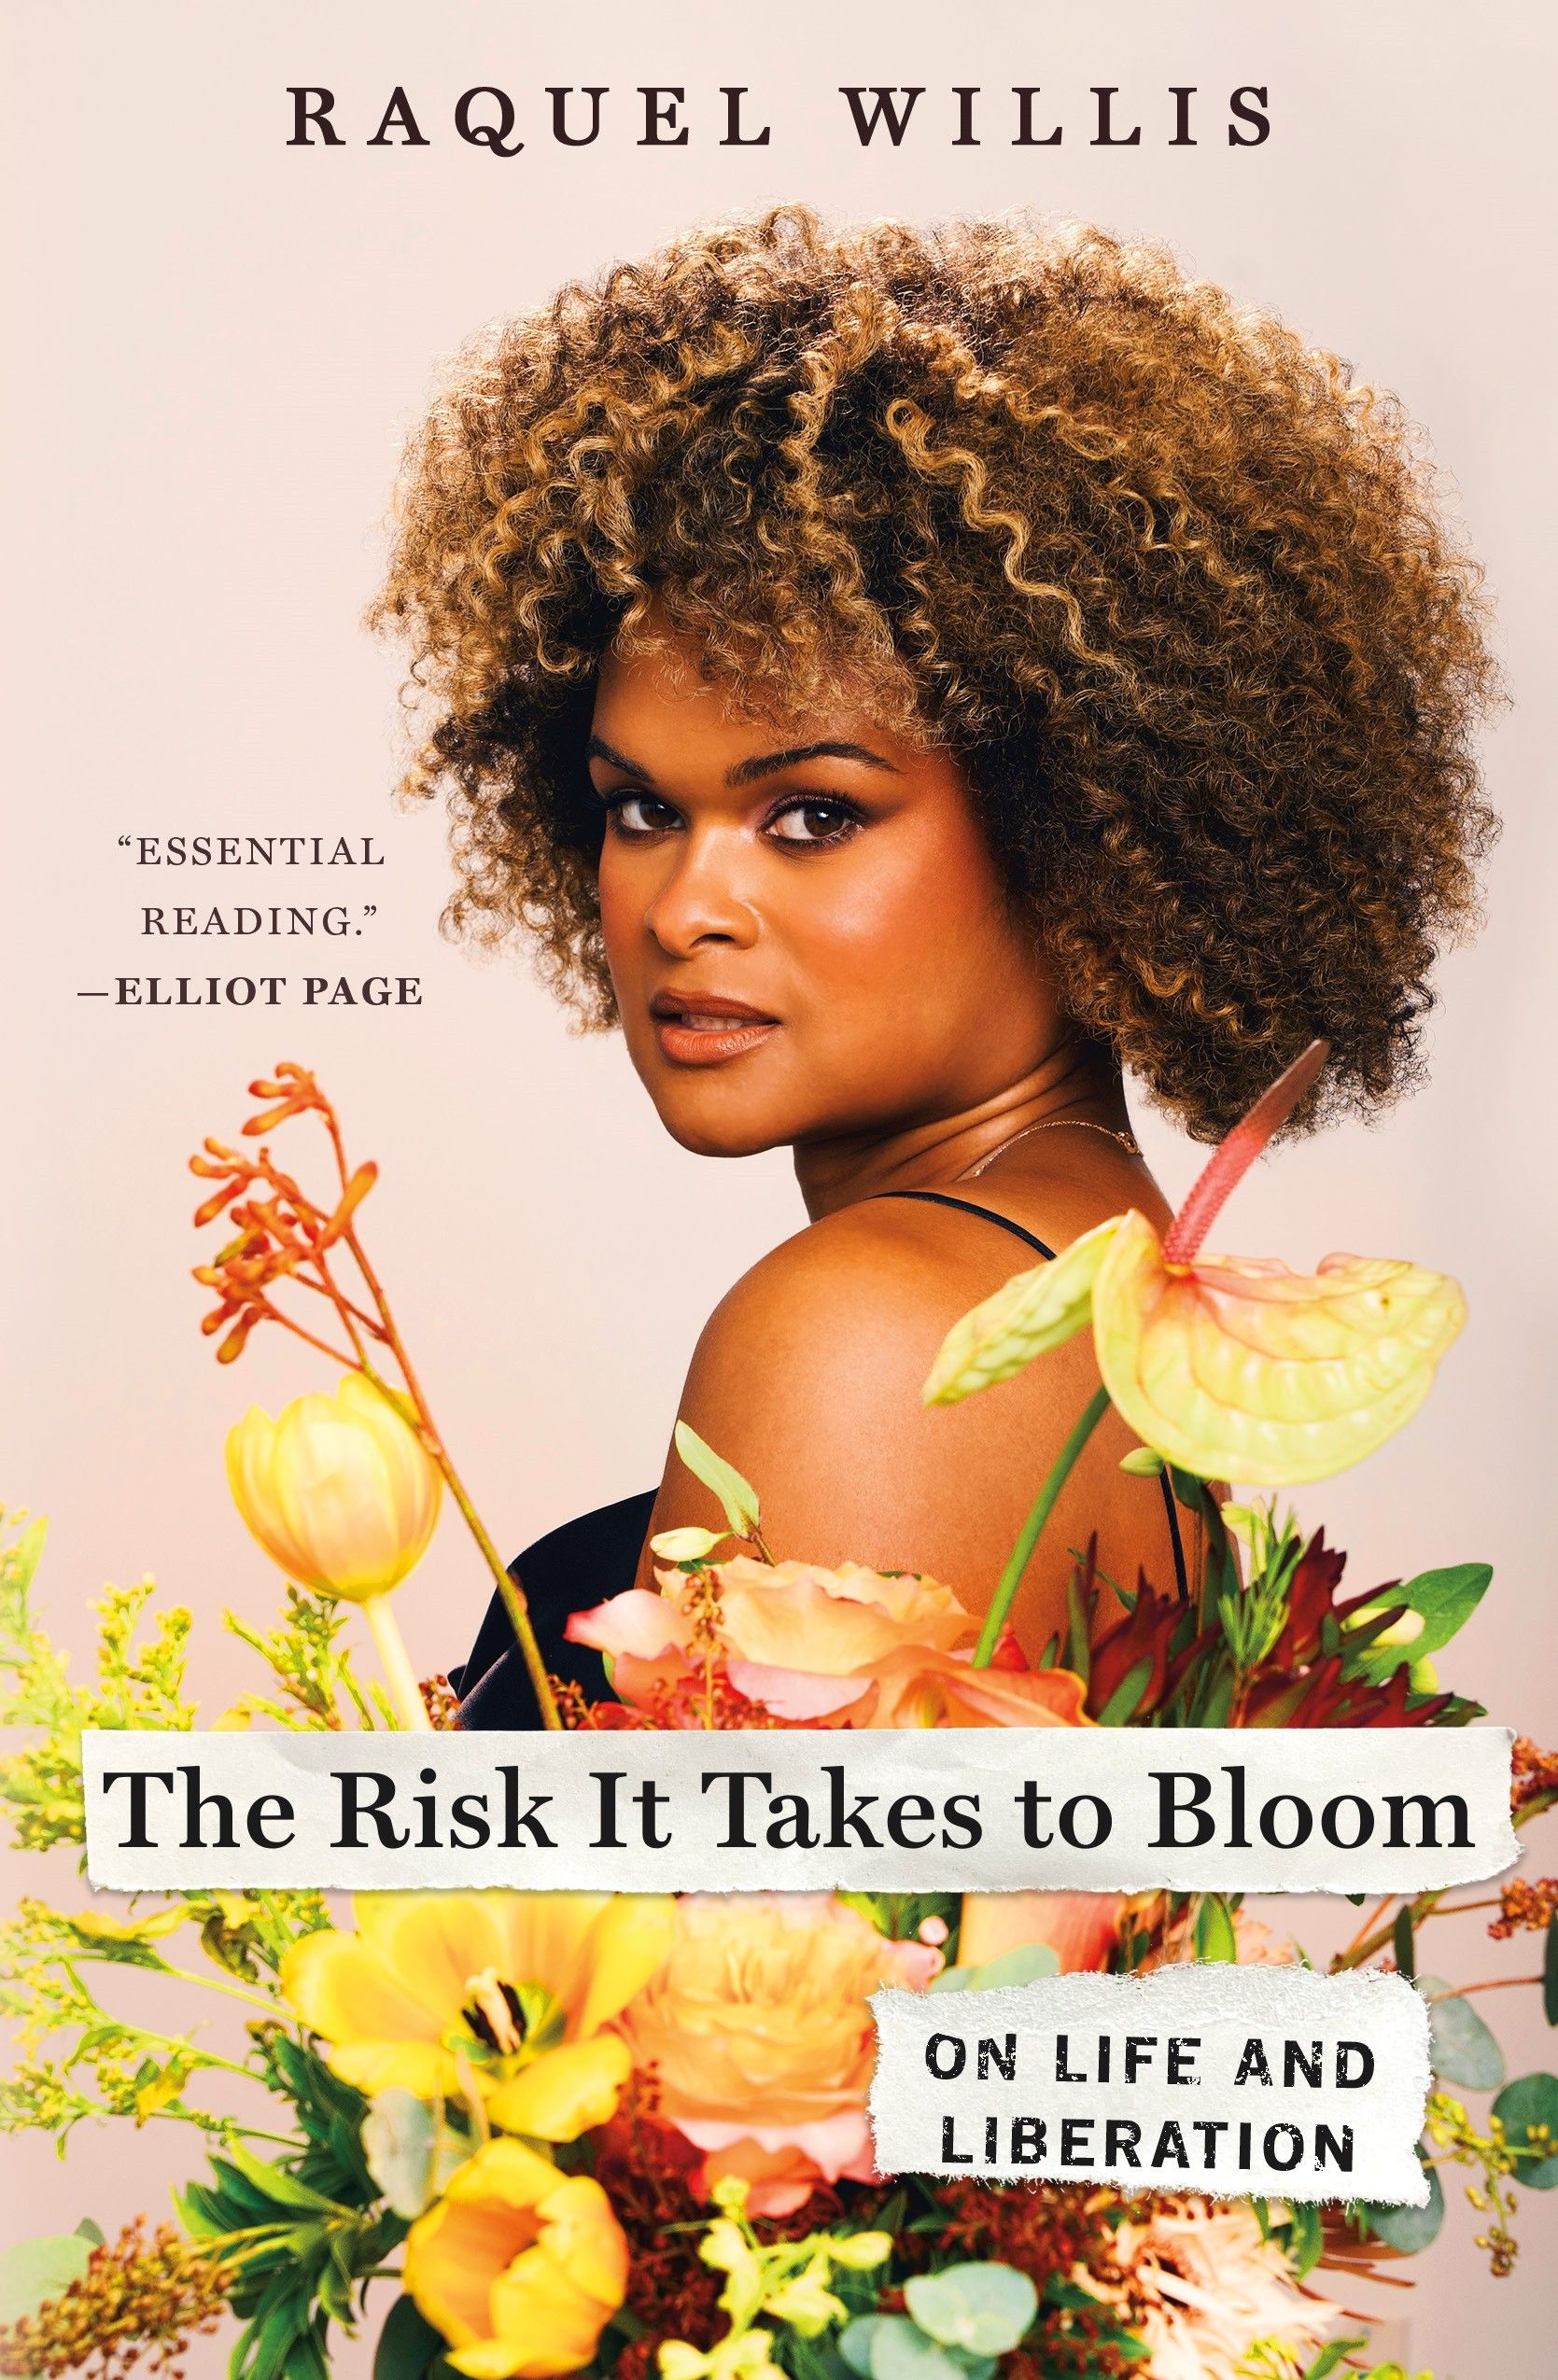 “The Risk It Takes to Bloom: On Life and Liberation" — c.2023, St. Martin's Press, $29.00, 384 pages